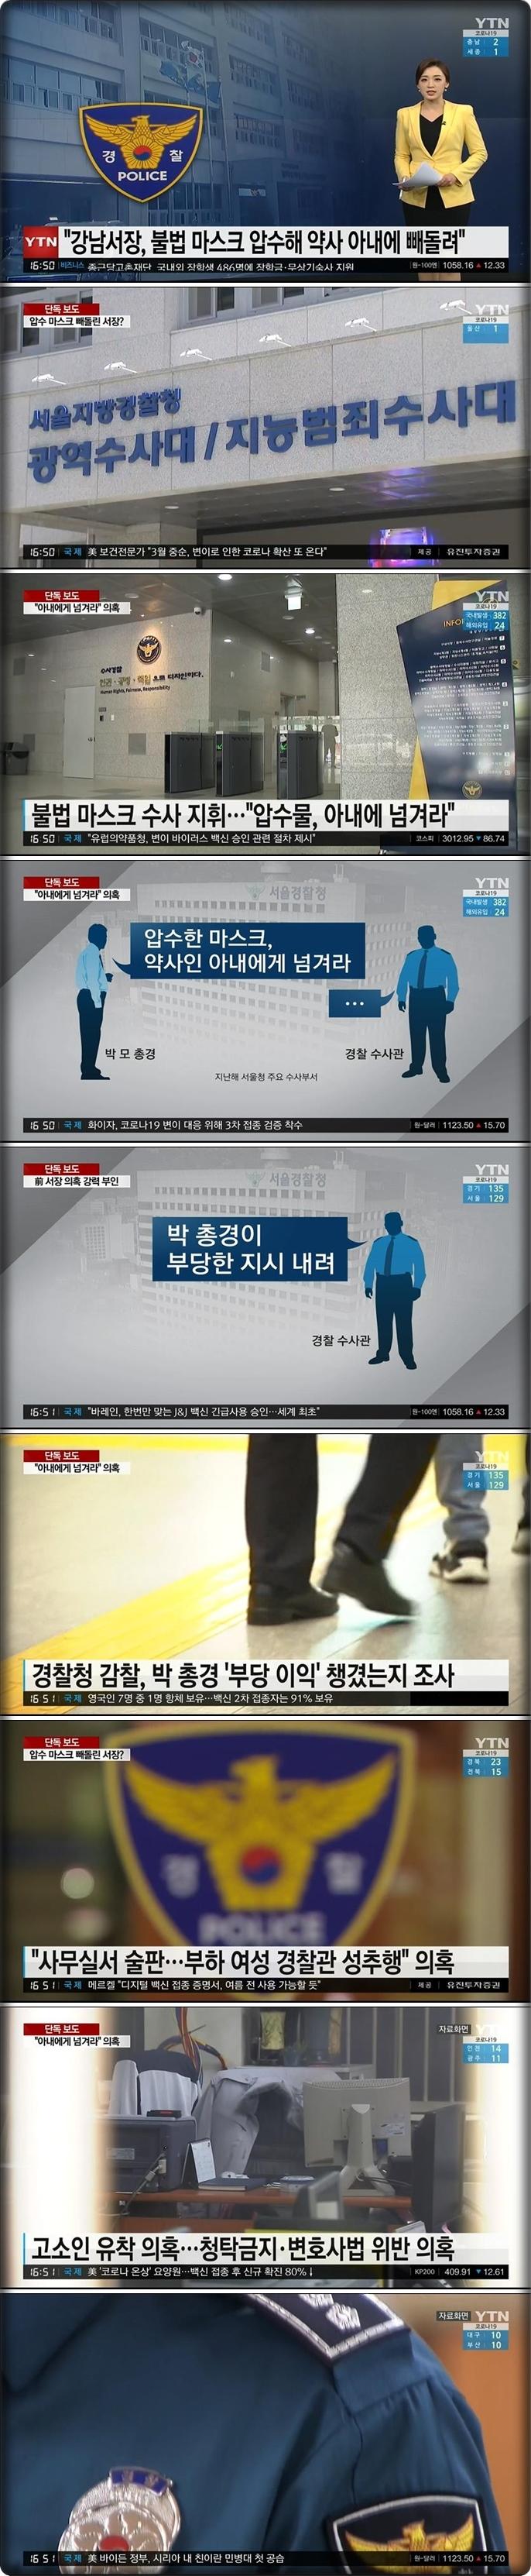 Gangnam Police Station Chief is close to achieving Triple Crown